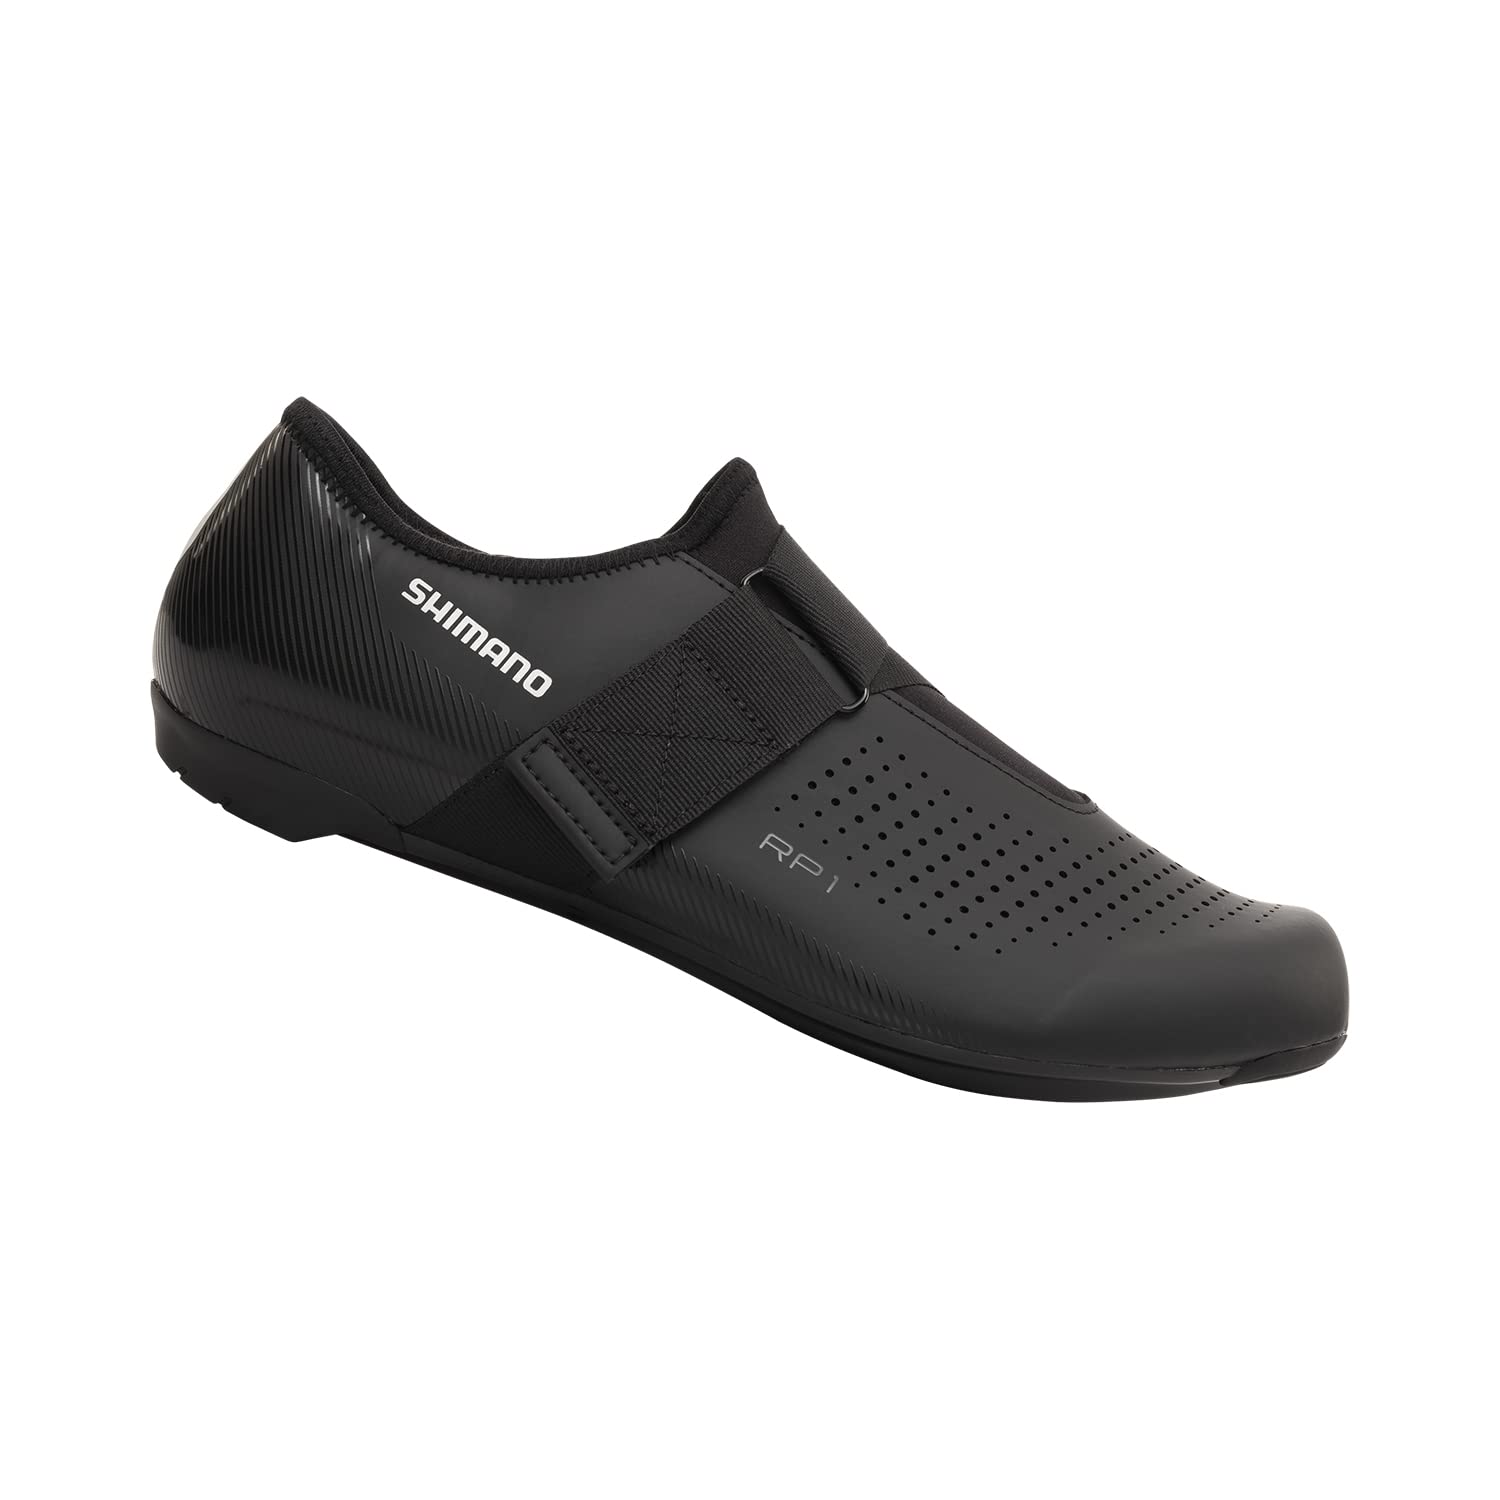 SHIMANO SH RP1 Unisex Cycling Shoe Road Bike Indoor Riding Shoe for Men and Women, All Rounder